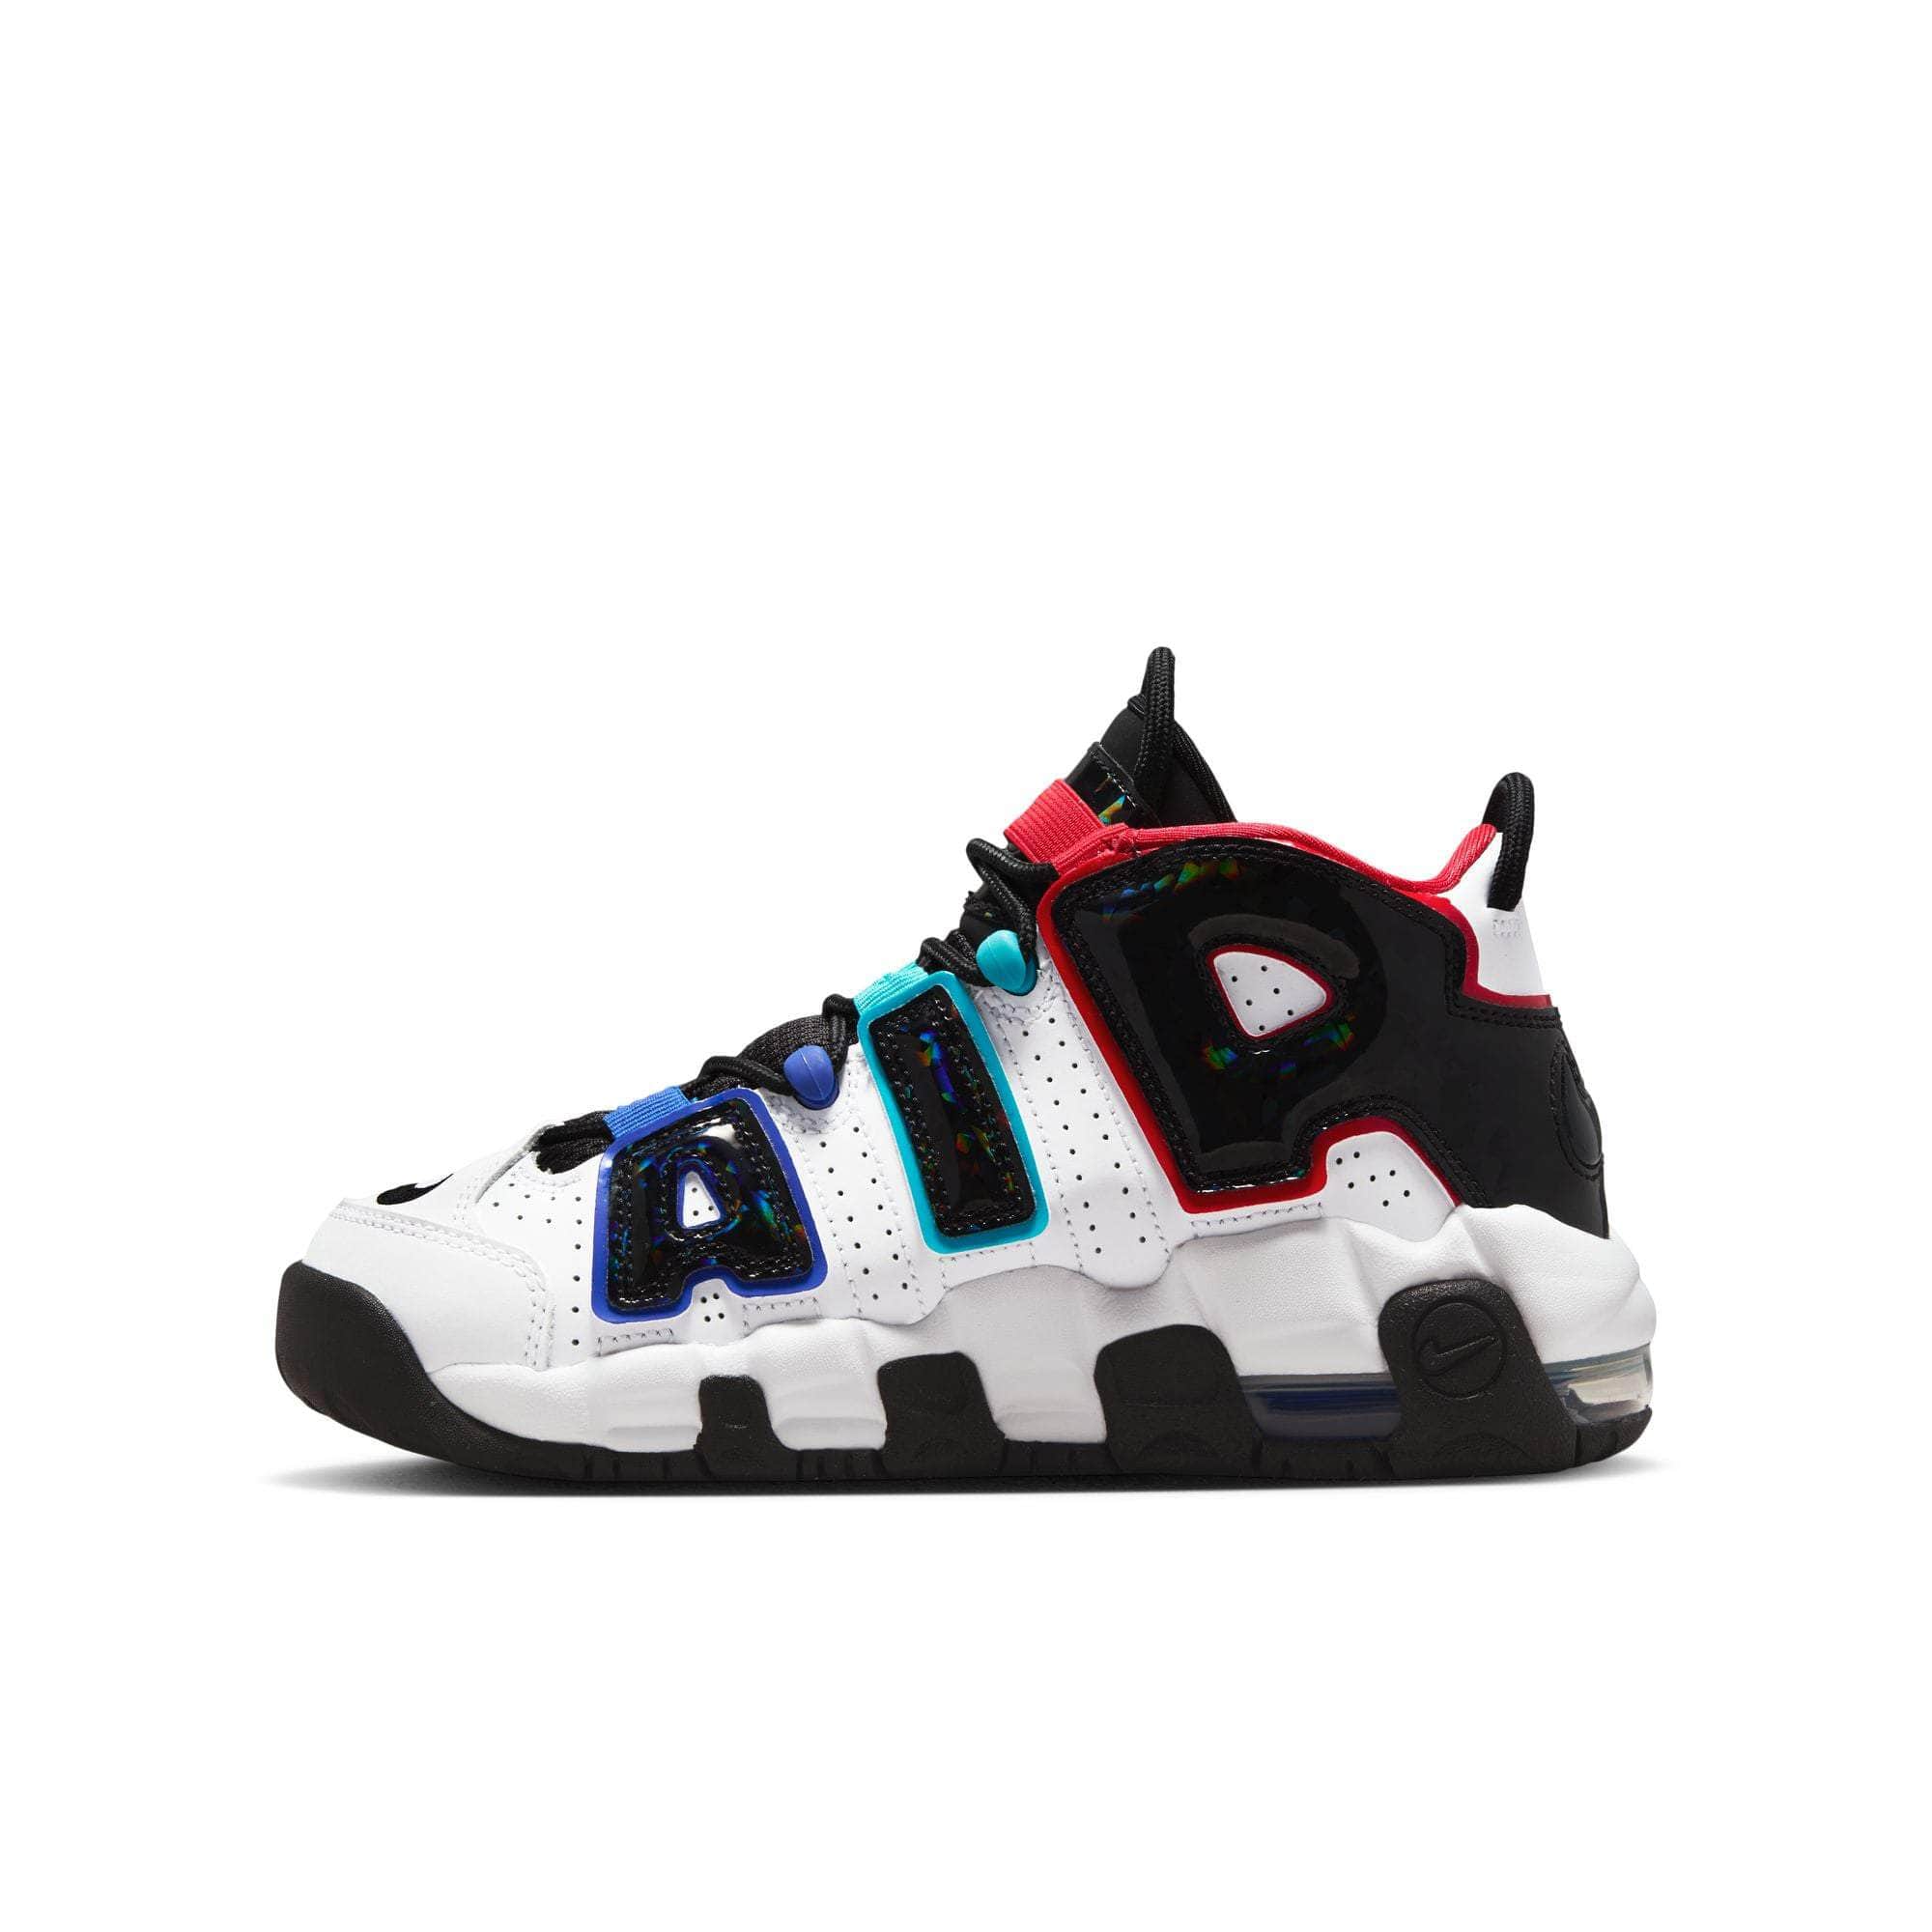 Nike Footwear Nike Air More Uptempo "Prism" - Boy's GS